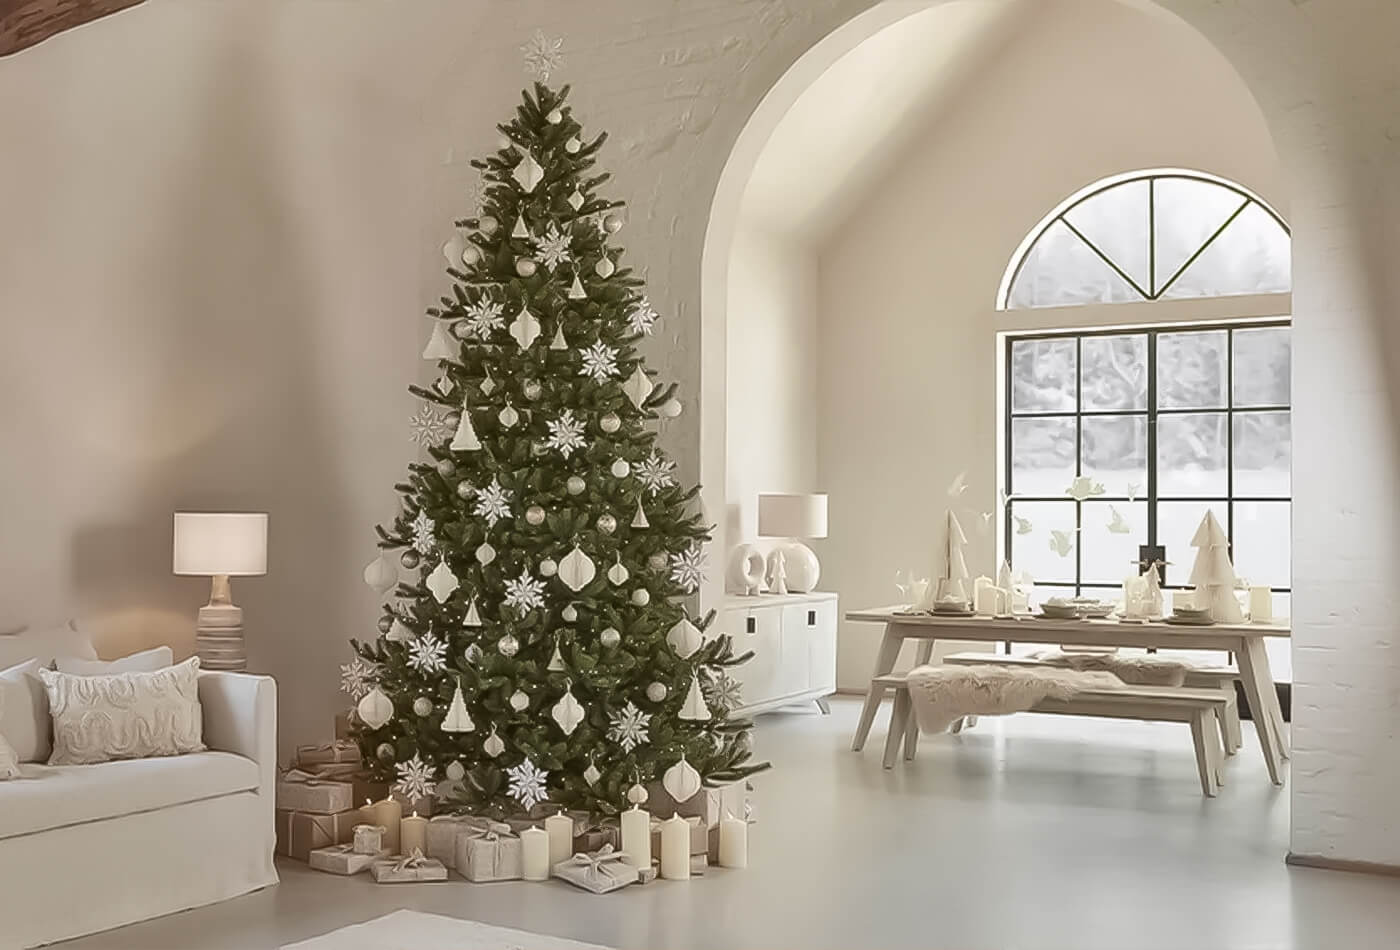 Use These Holiday Home Decor Ideas To Spice Up Your Home